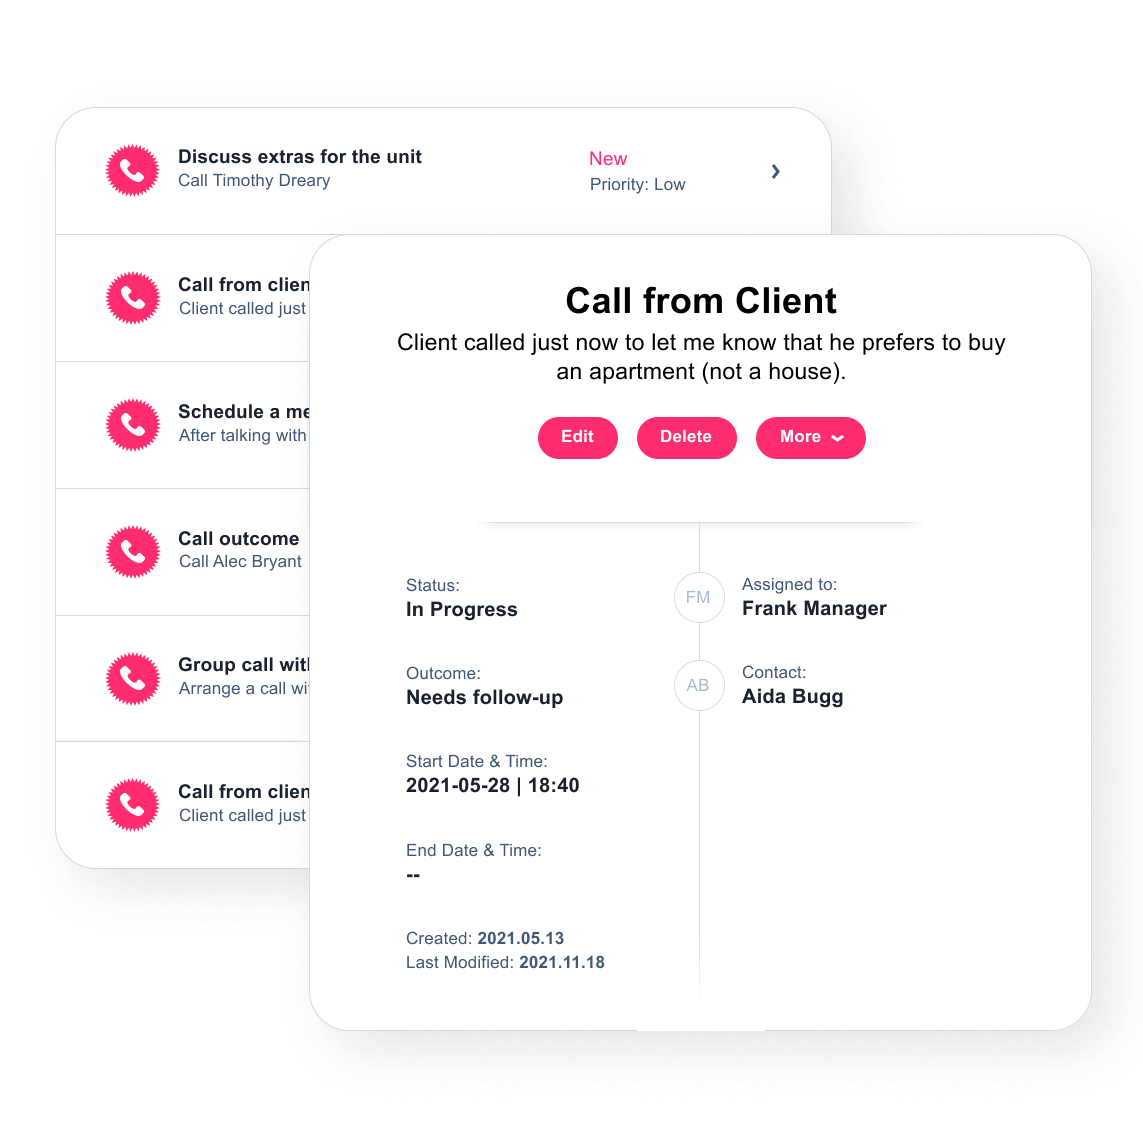 Monitor your entire call history